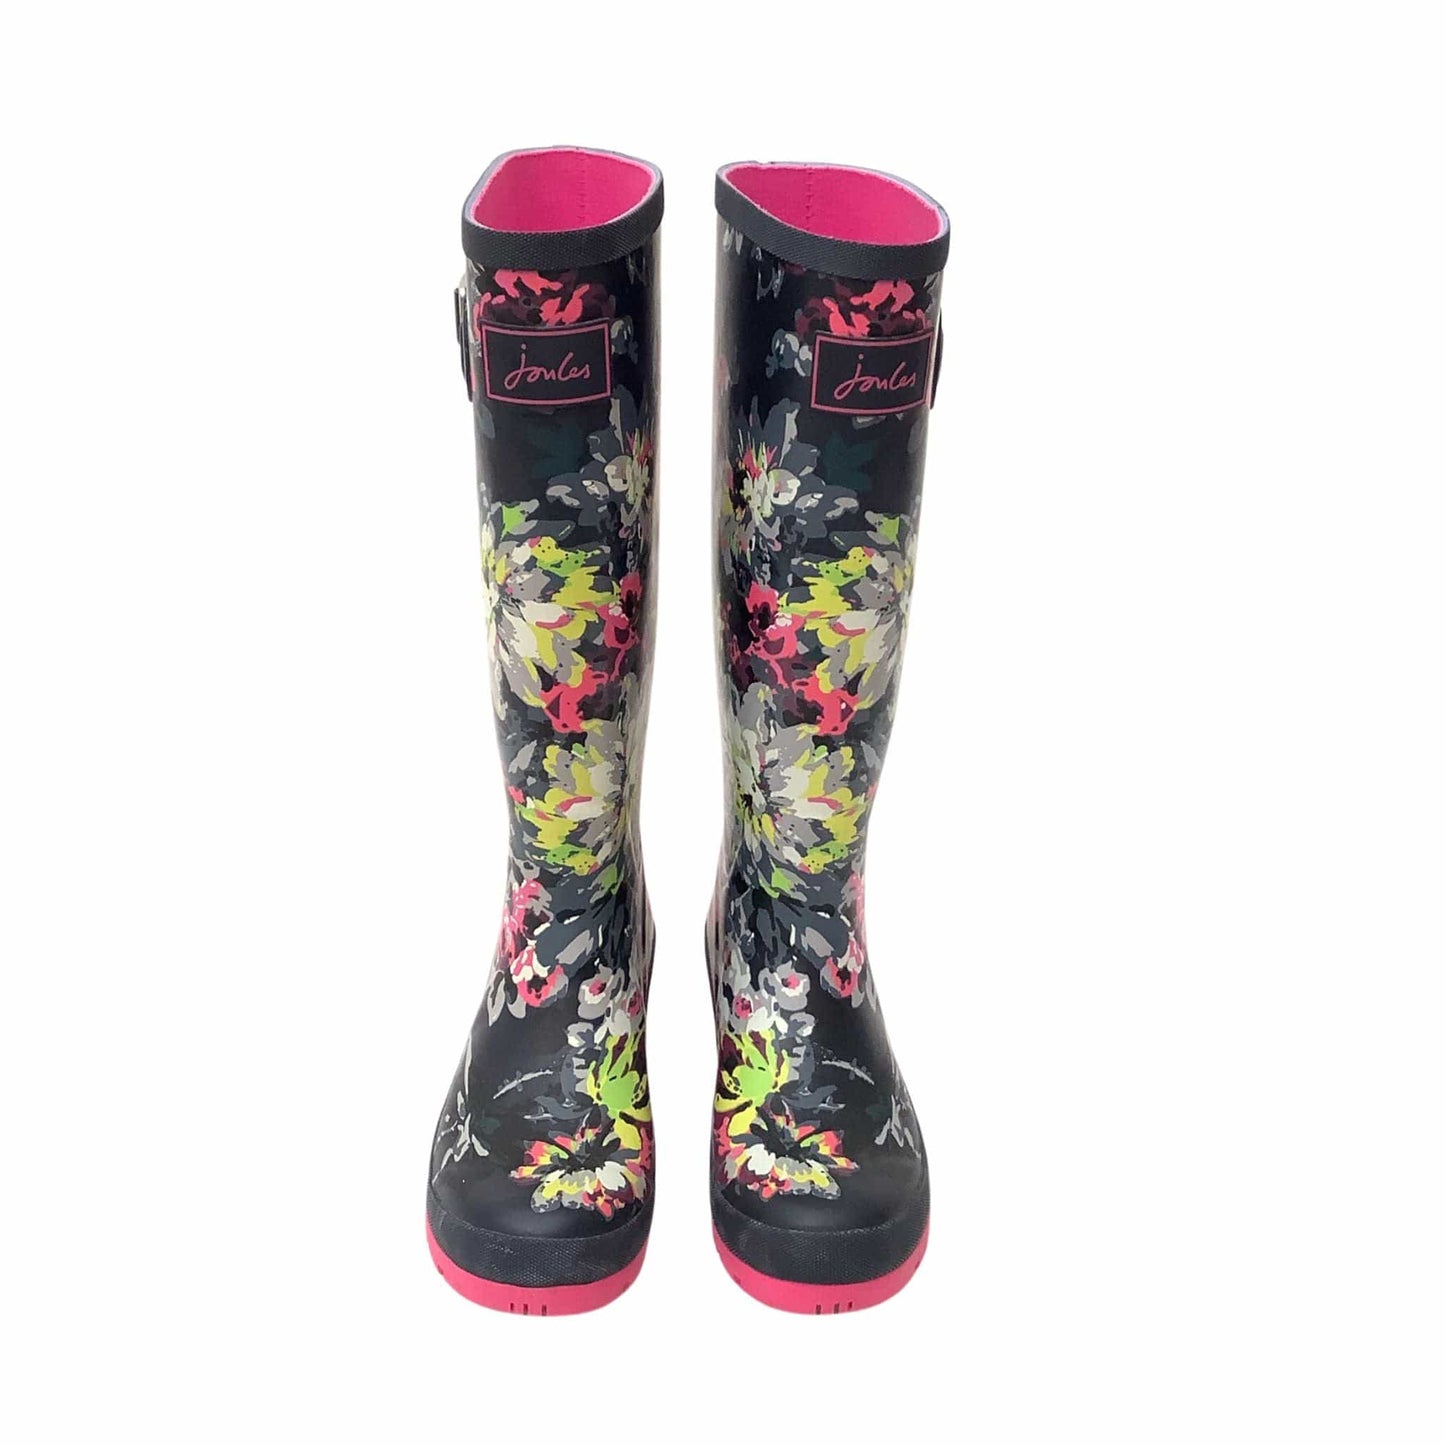 Joules Tall Rain Boots 6.5 / Multi / Y2K - Now